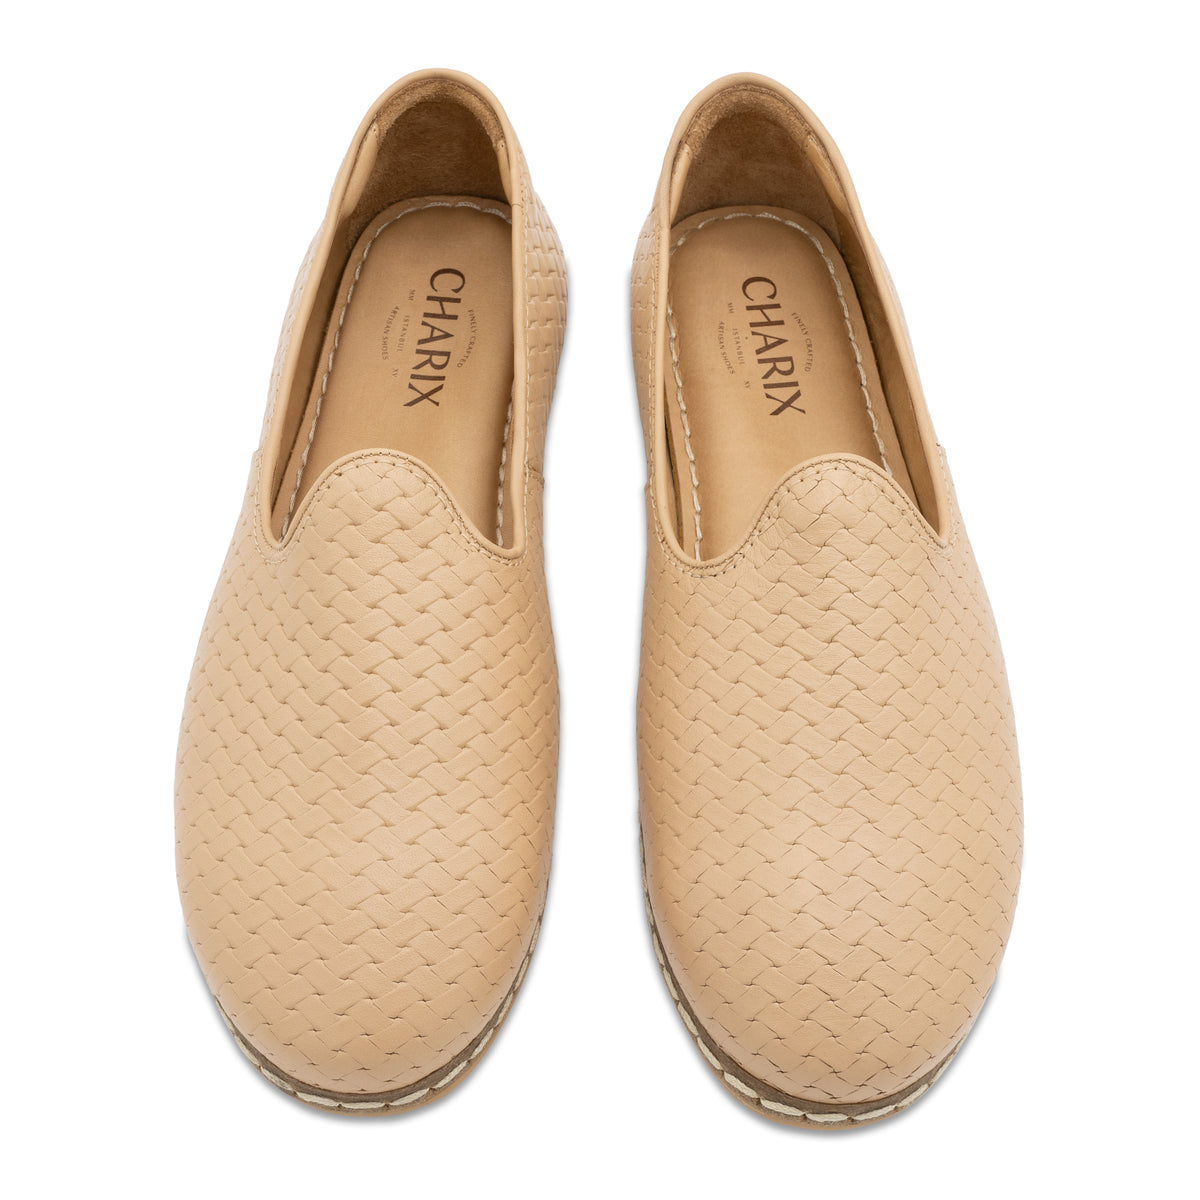 Woven Tan Slip On Shoes - Charix Shoes